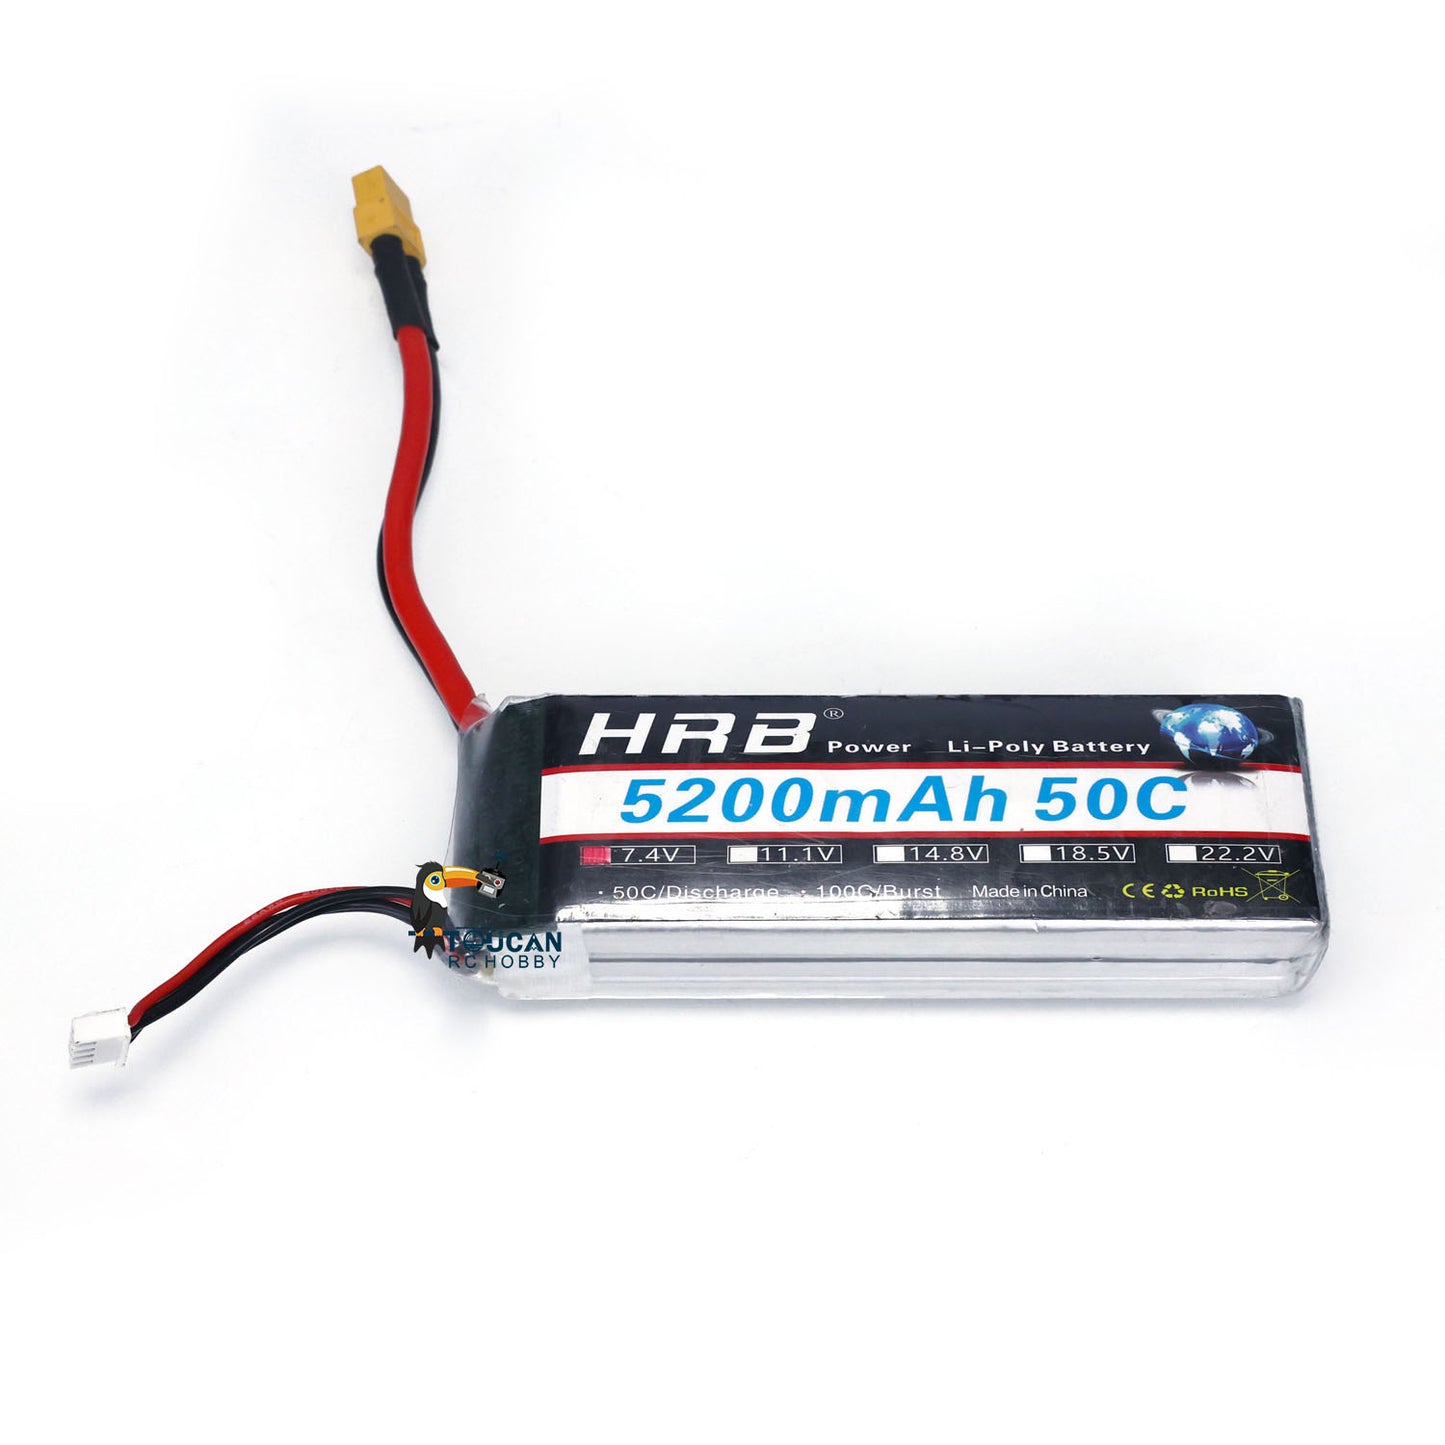 US Stock 7.4V 2S 5200MAH Lipo Battery for RC Hydraulic Excavator Tractor Truck TAMIYA Dumper Loader Constuction Vehicle Accessory